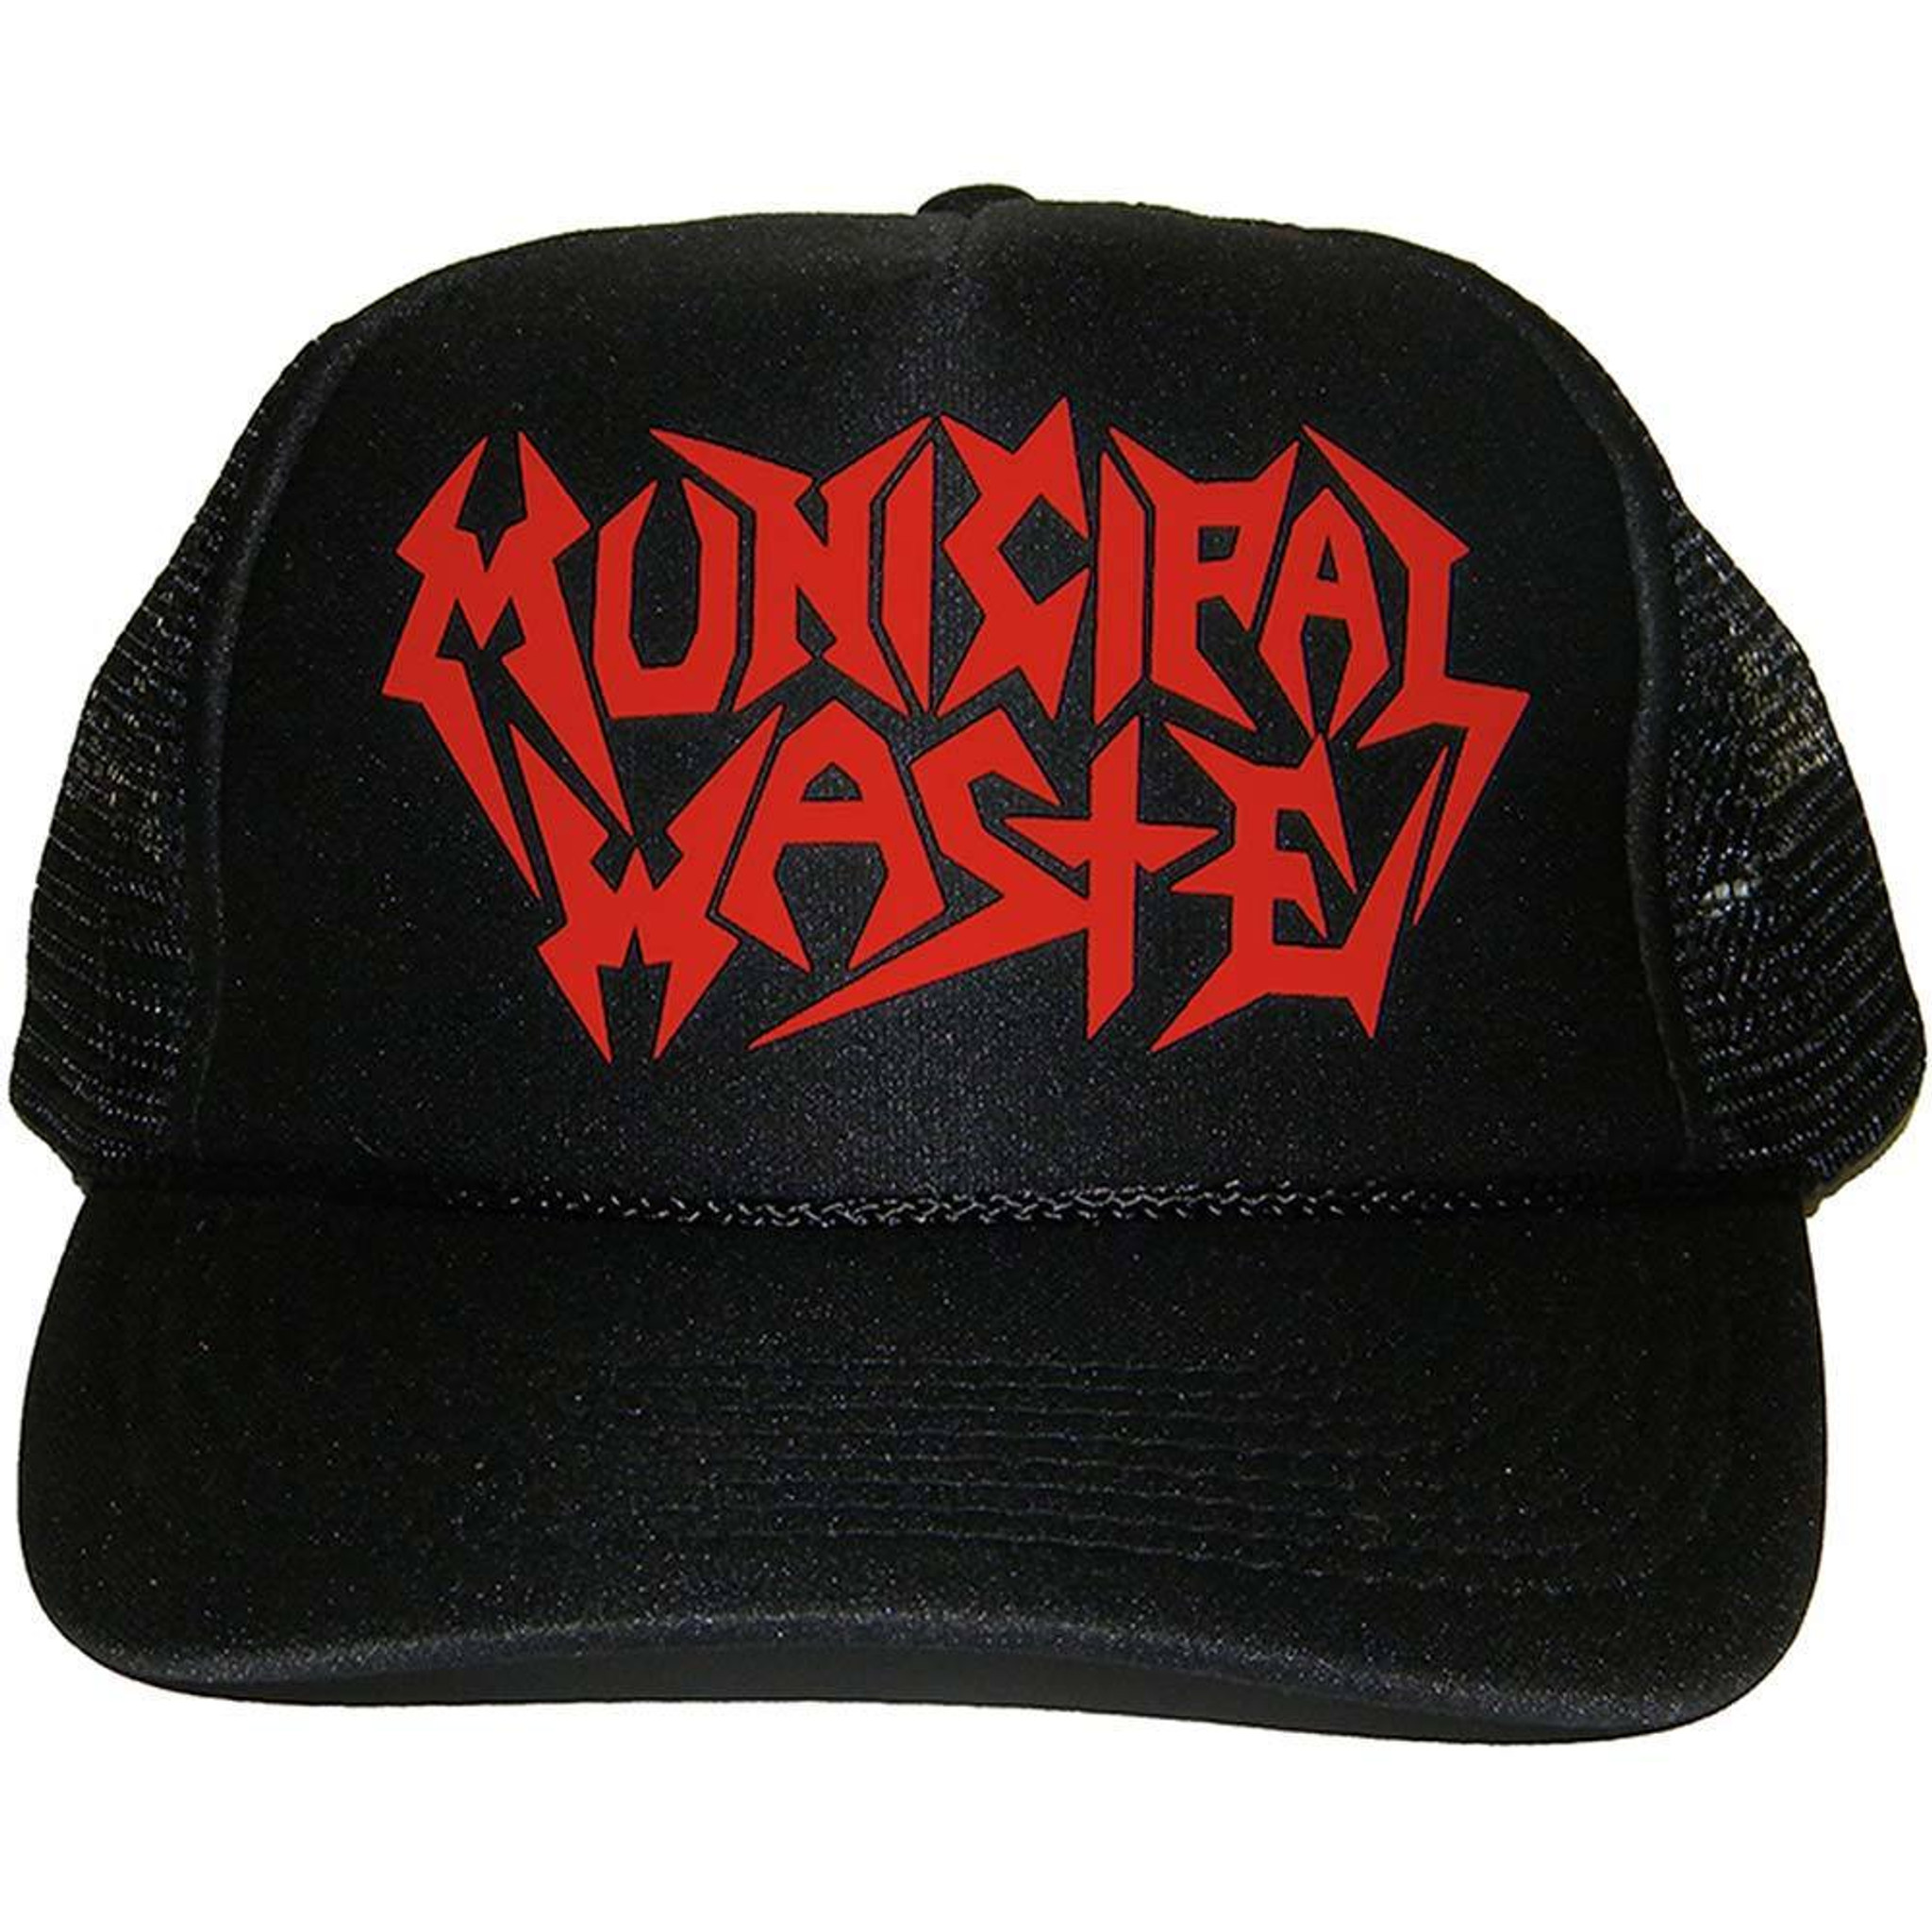 Municipal Waste Wasted Classic Trucker Cap Hat